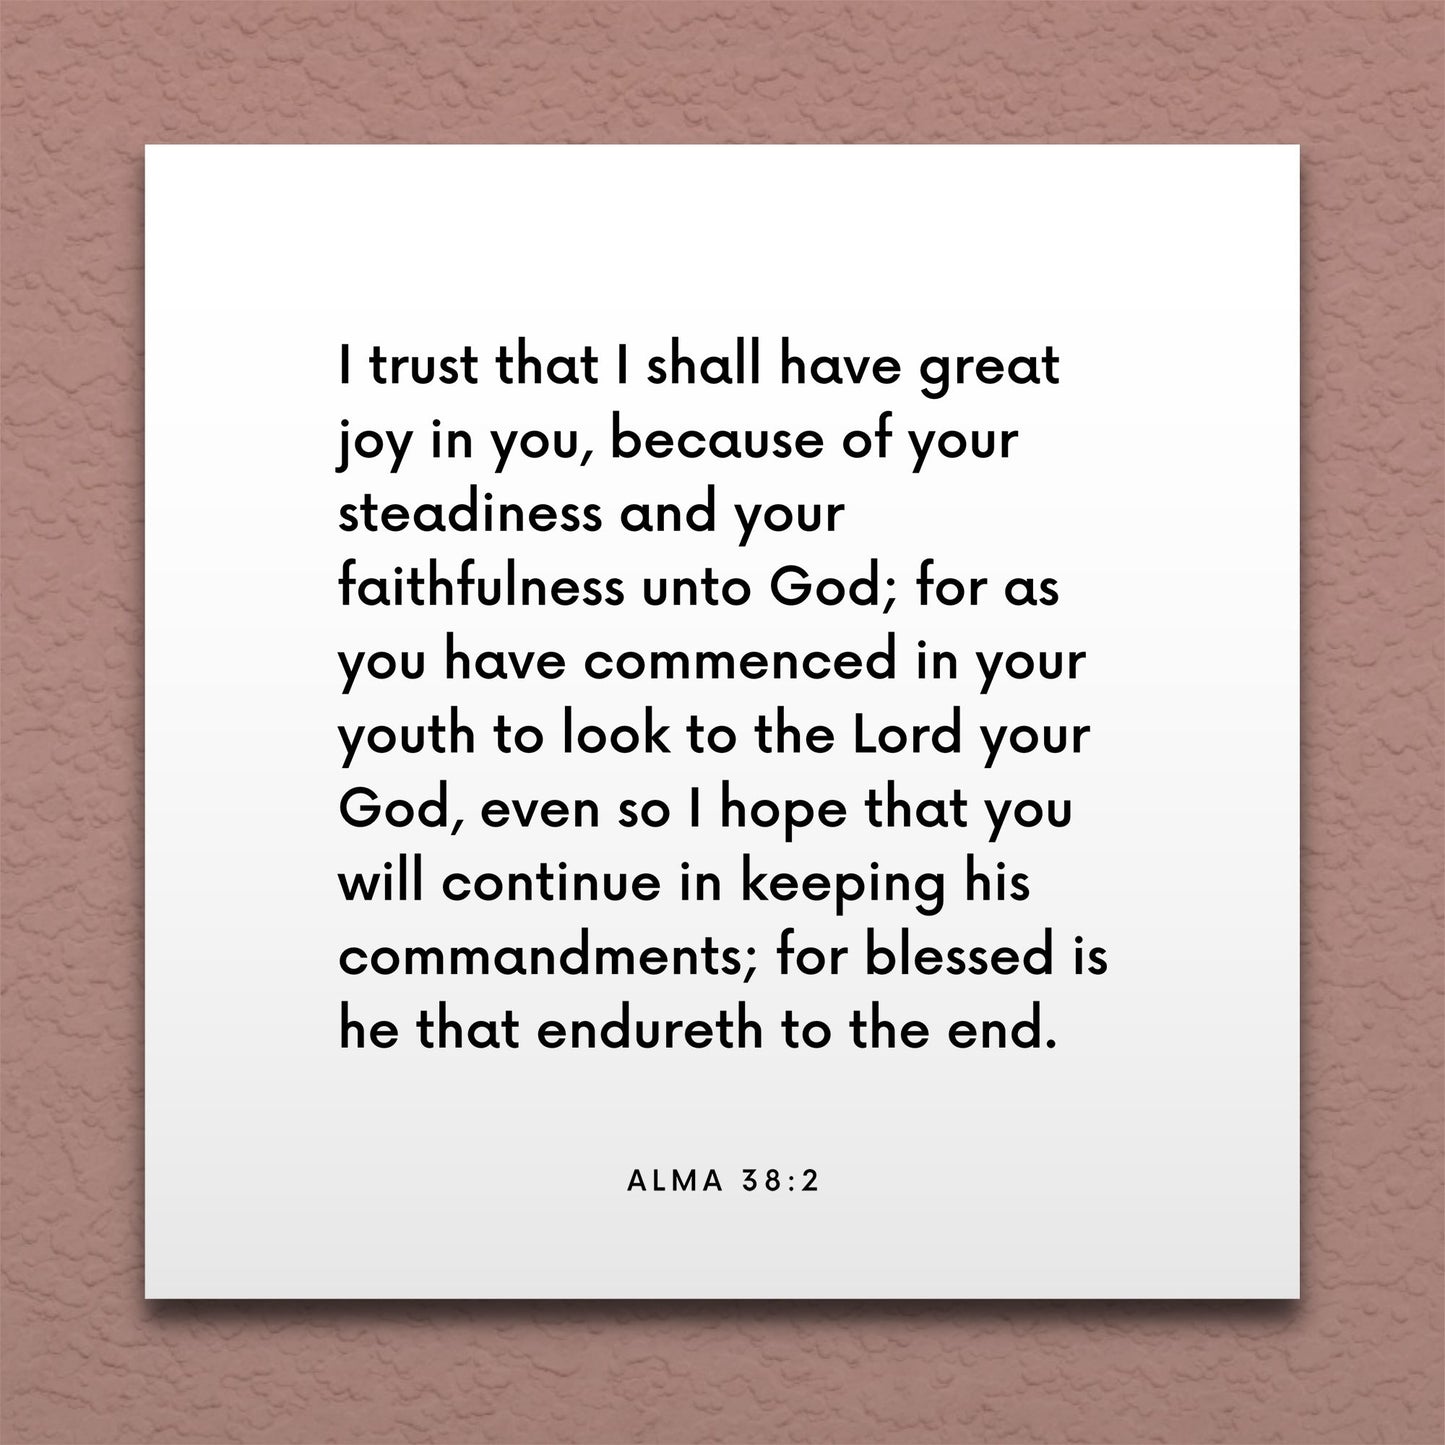 Wall-mounted scripture tile for Alma 38:2 - "Because of your steadiness and your faithfulness unto God"